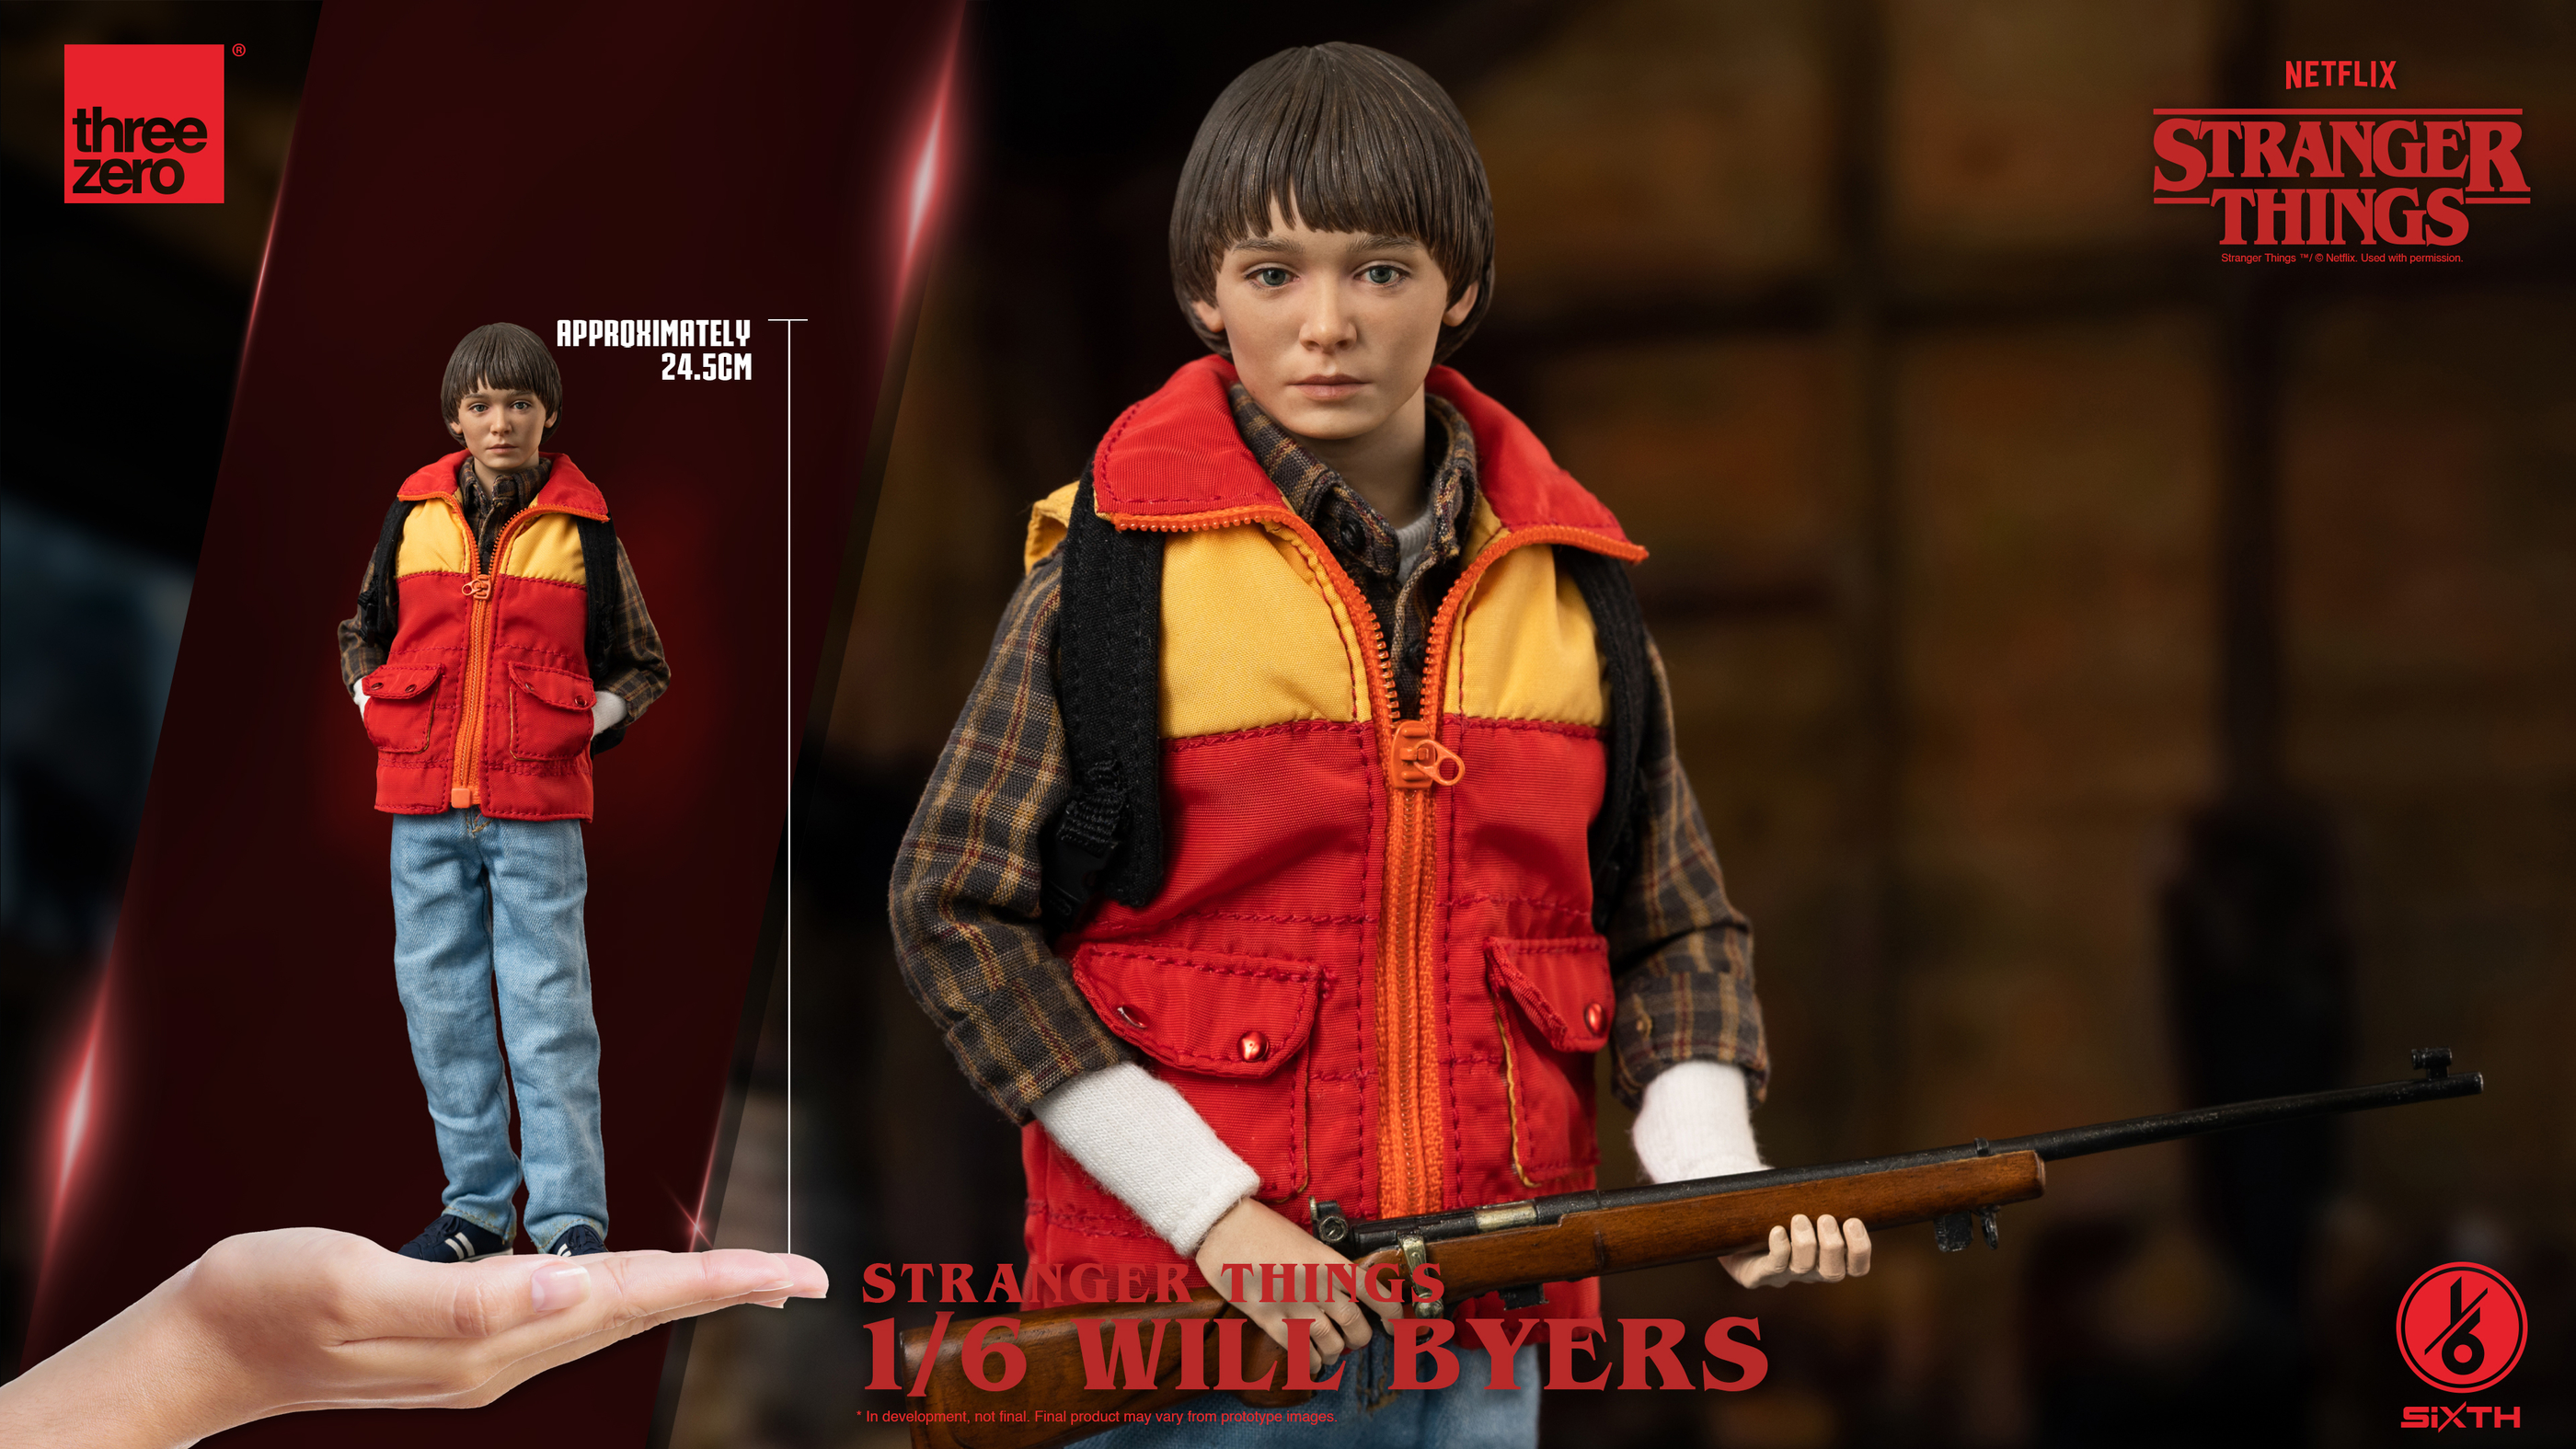 JAN238747 - STRANGER THINGS WILL BYERS 1/6 SCALE FIG - Previews World